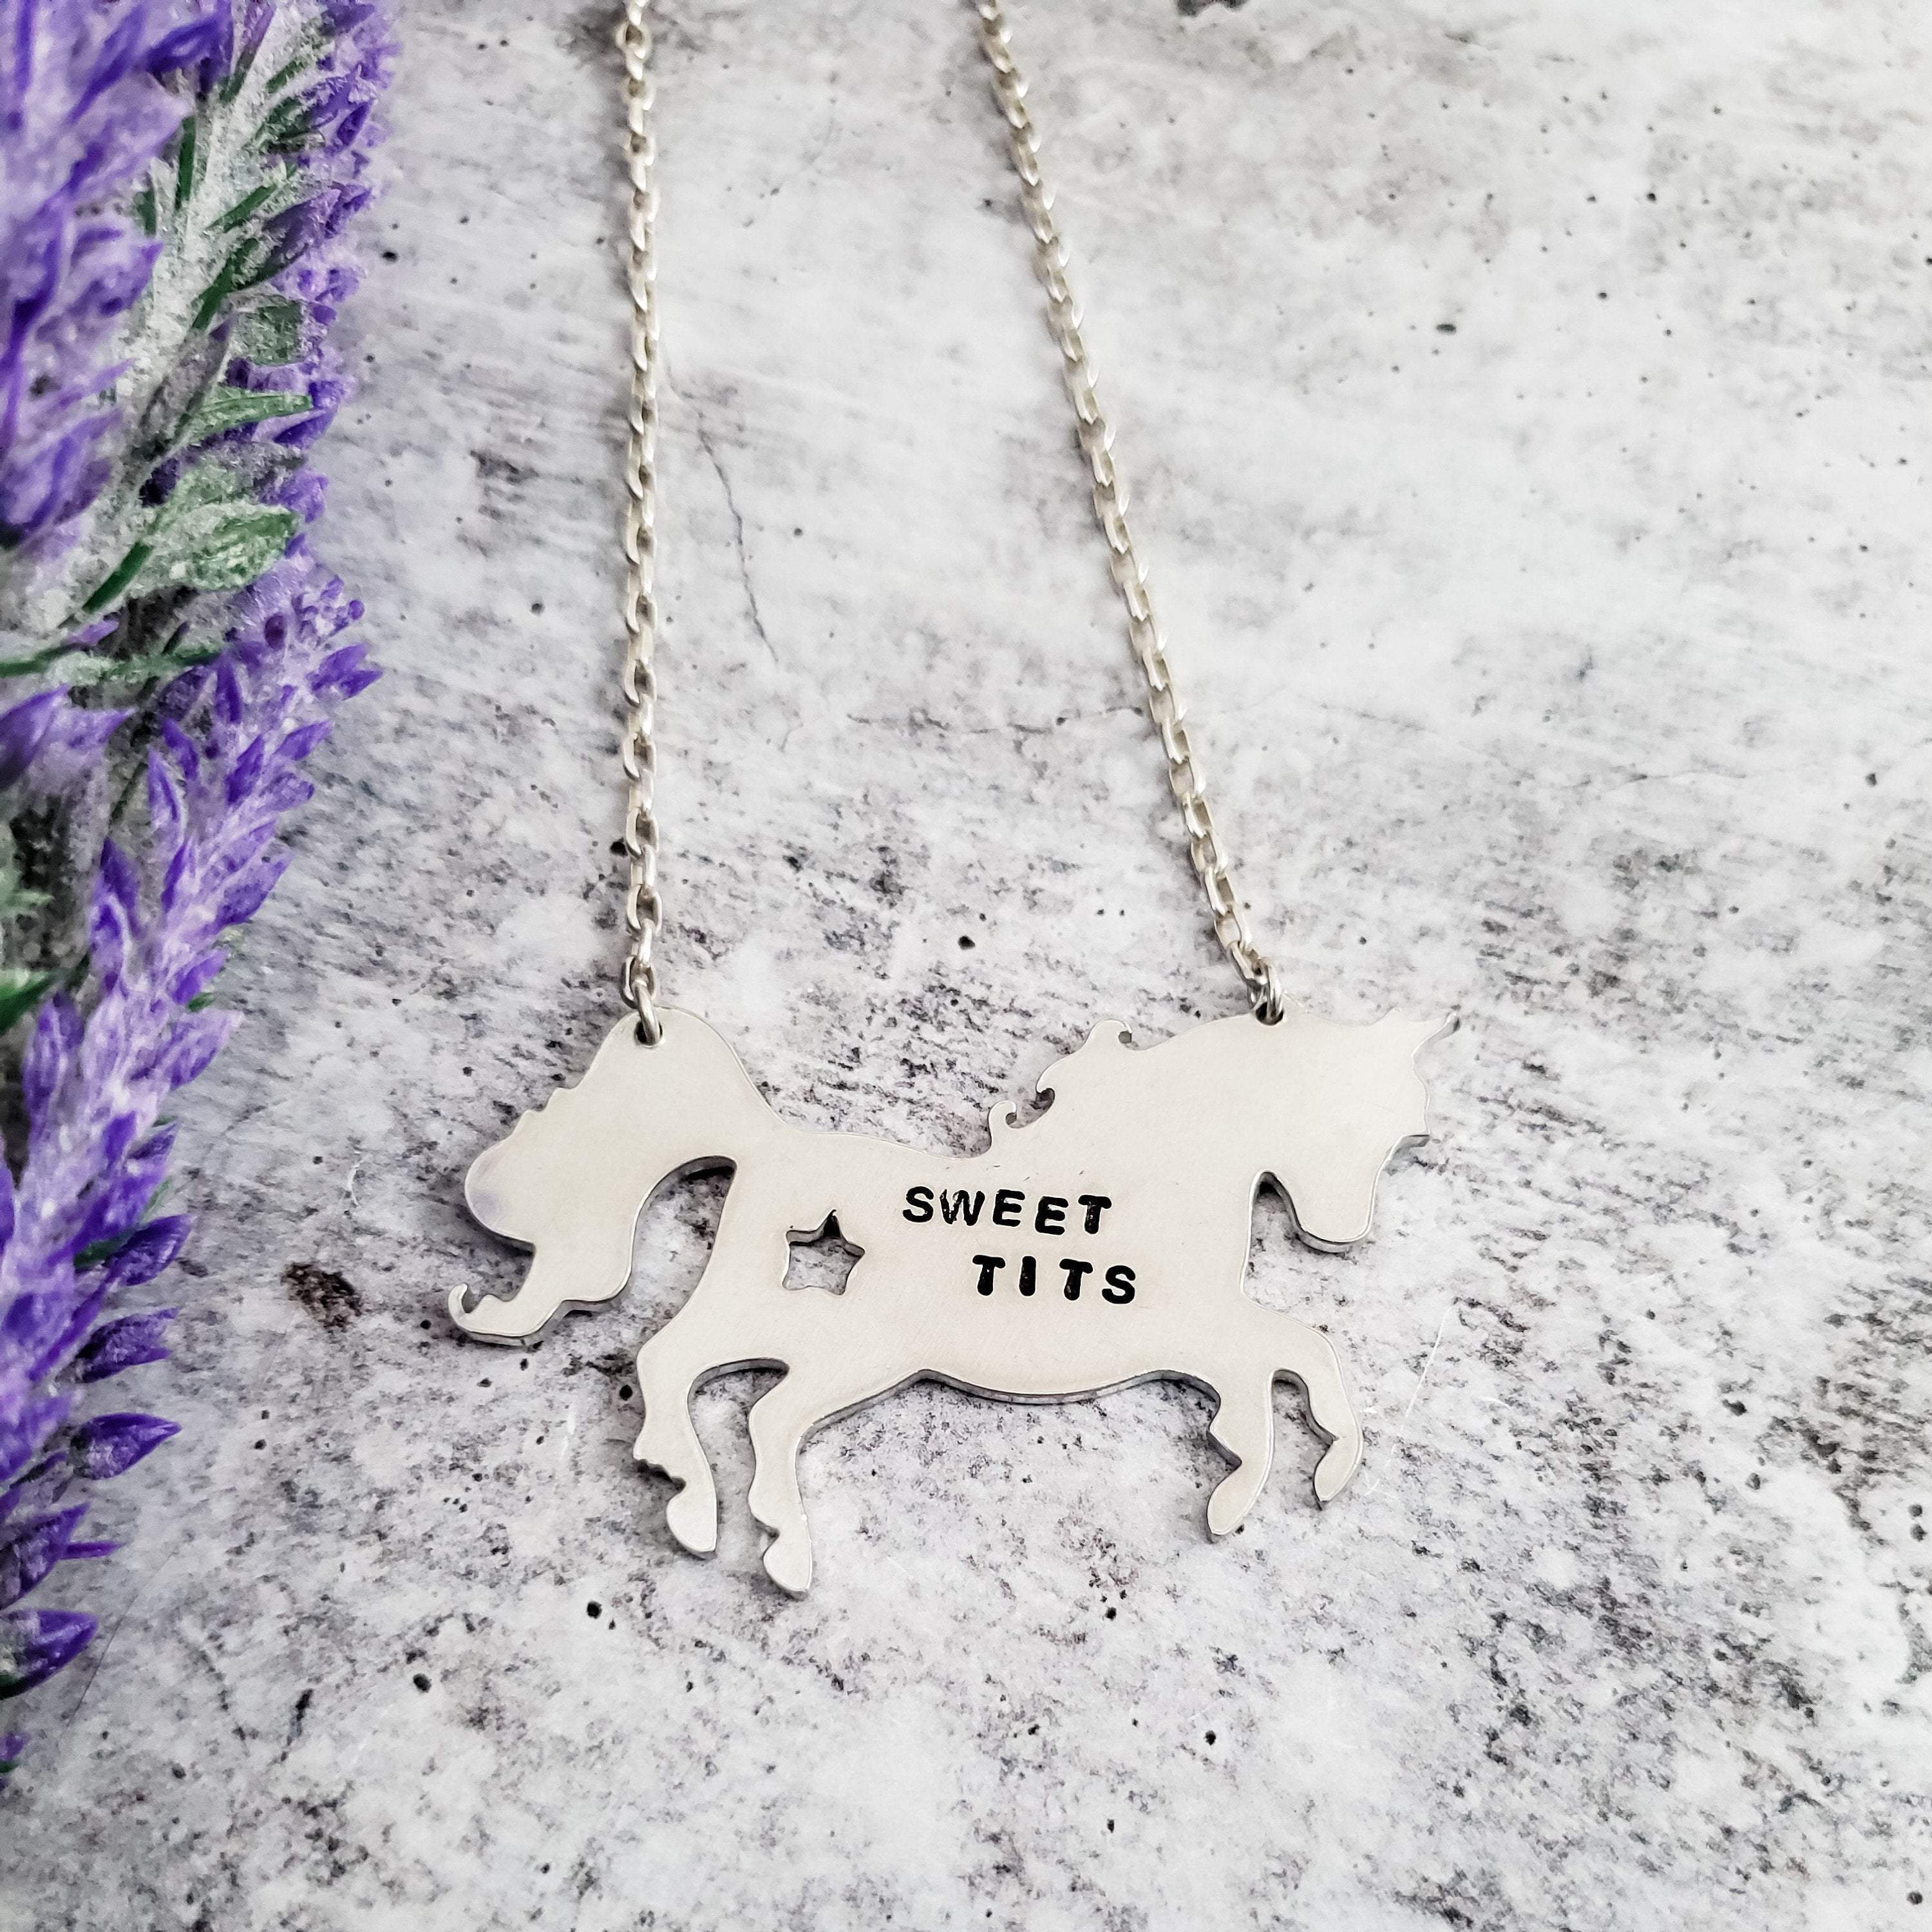 SWEET TITS Silver Unicorn Necklace Salt and Sparkle